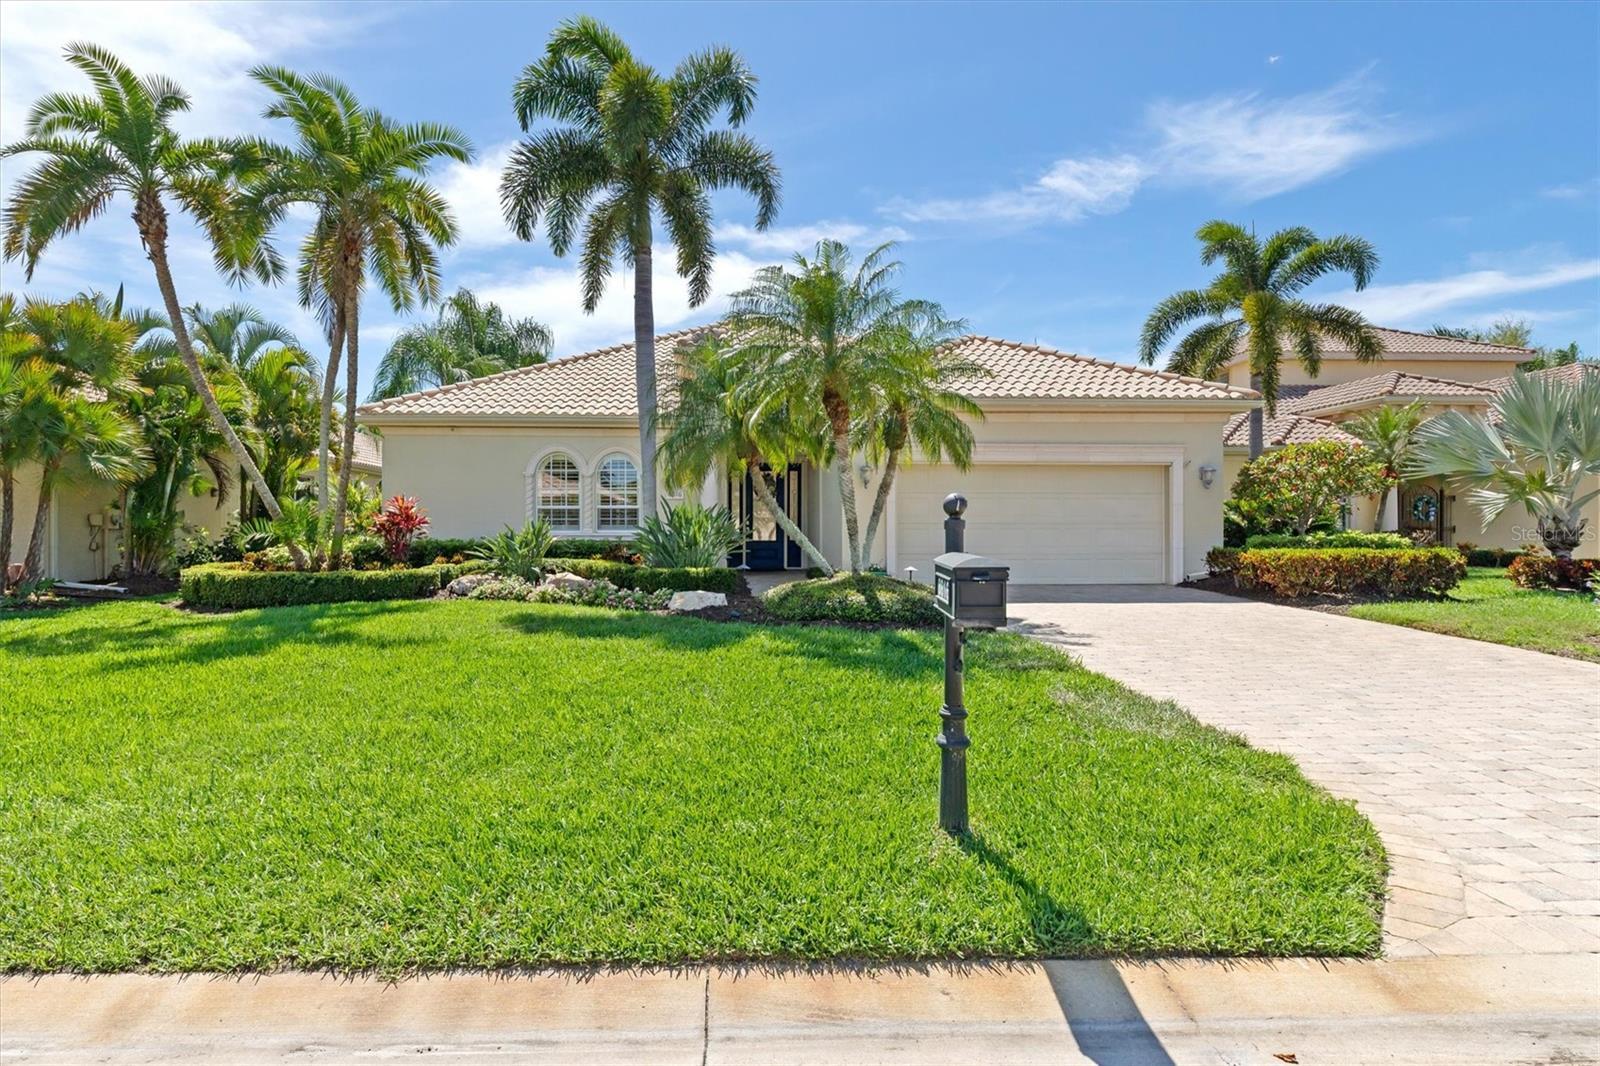 Photo one of 8816 Enclave Ct Sarasota FL 34238 | MLS A4604334